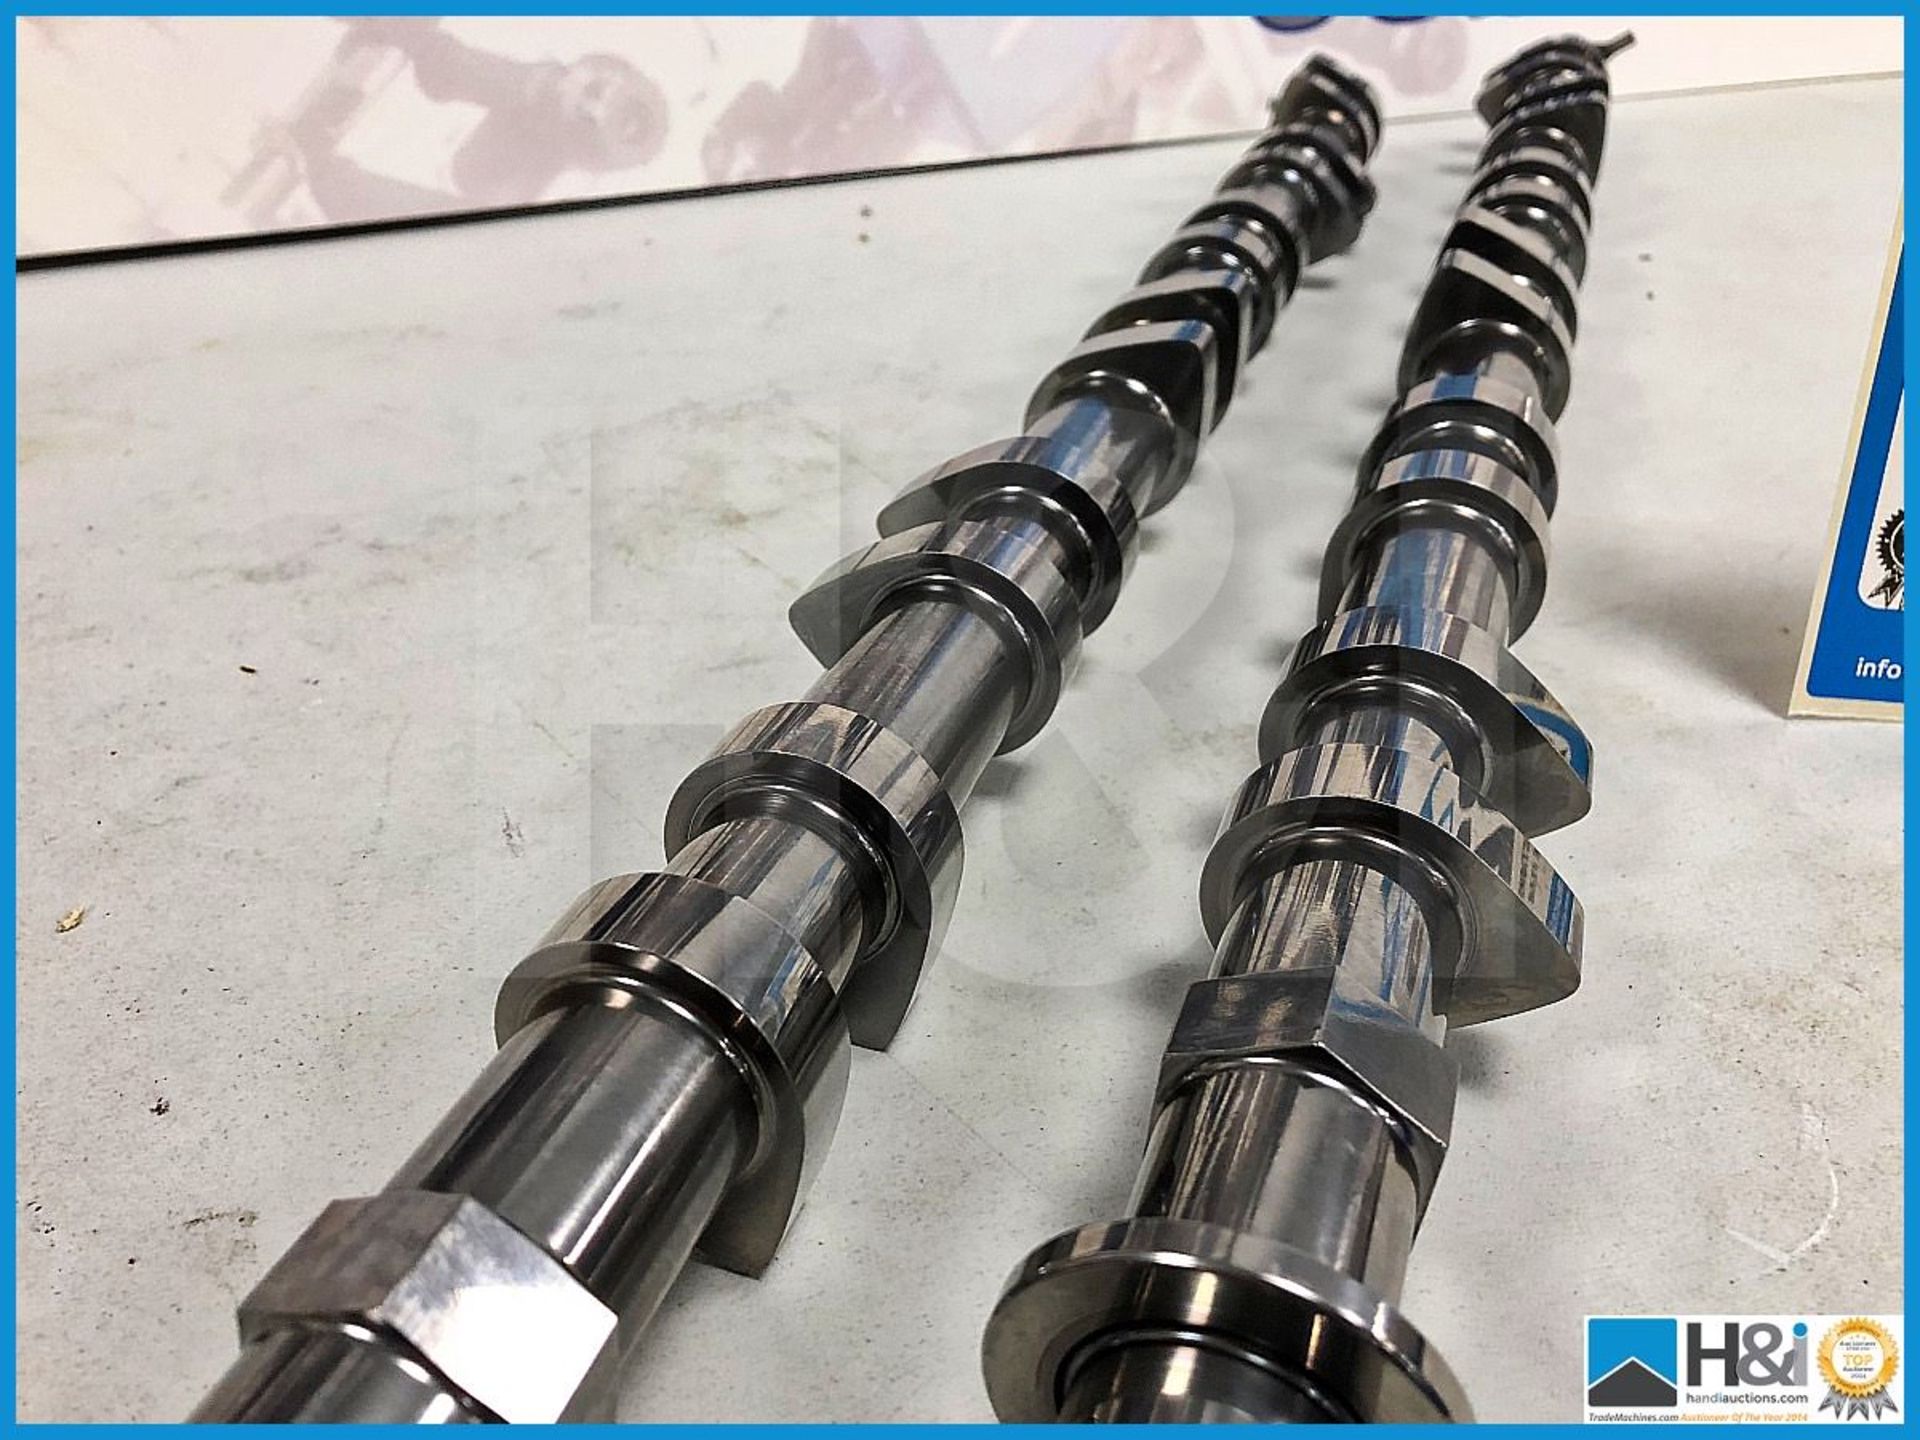 Cosworth JK RH and LH inlet camshafts AM18. Code: 20007562 and 20007563. Lot 259 & 260. RRP GBP 4,20 - Image 3 of 4